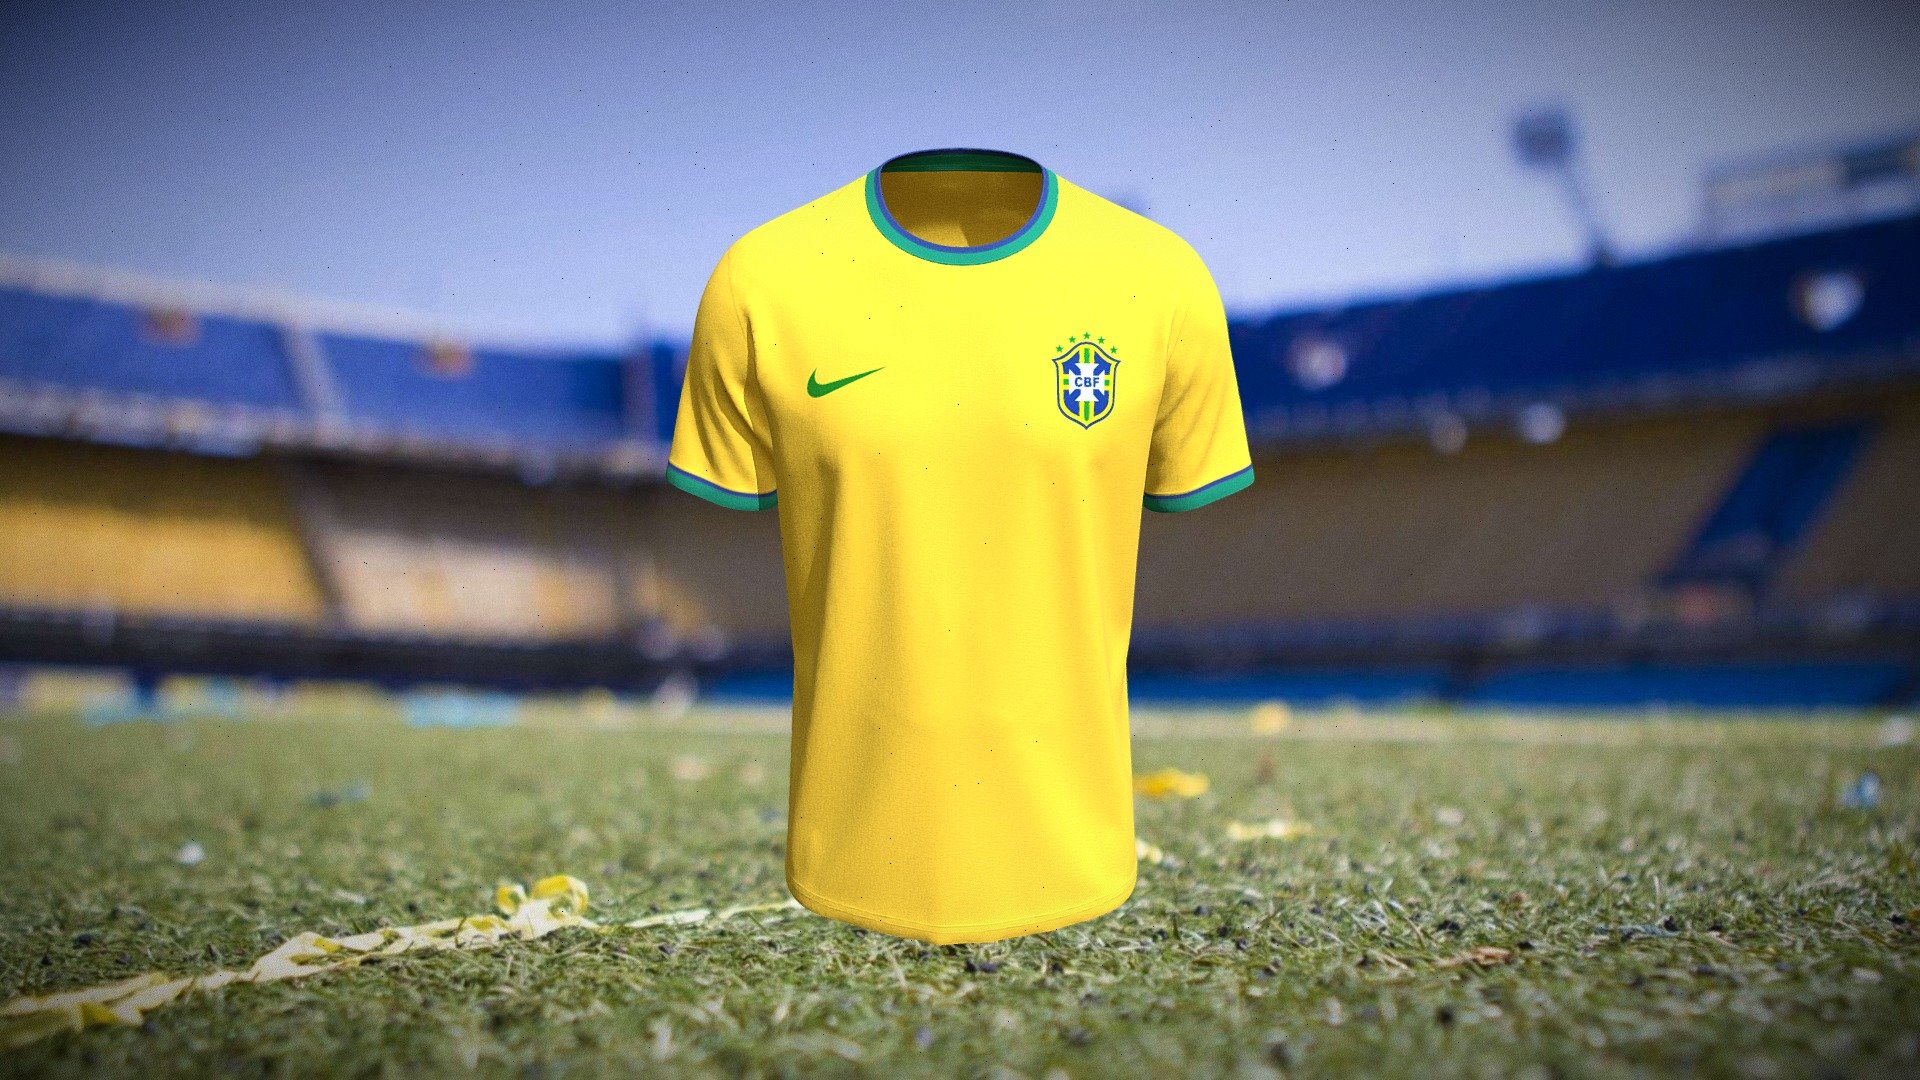 Cloth Title = Brazil Replica World Cup Official Home Jersey

SKU = DG100044 

Category = Unisex 

Product Type = T-Shirt 

Cloth Length = Regular 

Body Fit = Loose Fit 

Occasion = Casual  

Sleeve Style = Set In Sleeve


Our Services:

3D Apparel Design.

OBJ,FBX,GLTF Making with High/Low Poly.

Fabric Digitalization.

Mockup making.

3D Teck Pack.

Pattern Making.

2D Illustration.

Cloth Animation and 360 Spin Video.


Contact us:- 

Email: info@digitalfashionwear.com 

Website: https://digitalfashionwear.com 


We designed all the types of cloth specially focused on product visualization, e-commerce, fitting, and production. 

We will design: 

T-shirts 

Polo shirts 

Hoodies 

Sweatshirt 

Jackets 

Shirts 

TankTops 

Trousers 

Bras 

Underwear 

Blazer 

Aprons 

Leggings 

and All Fashion items. 





Our goal is to make sure what we provide you, meets your demand 3d model